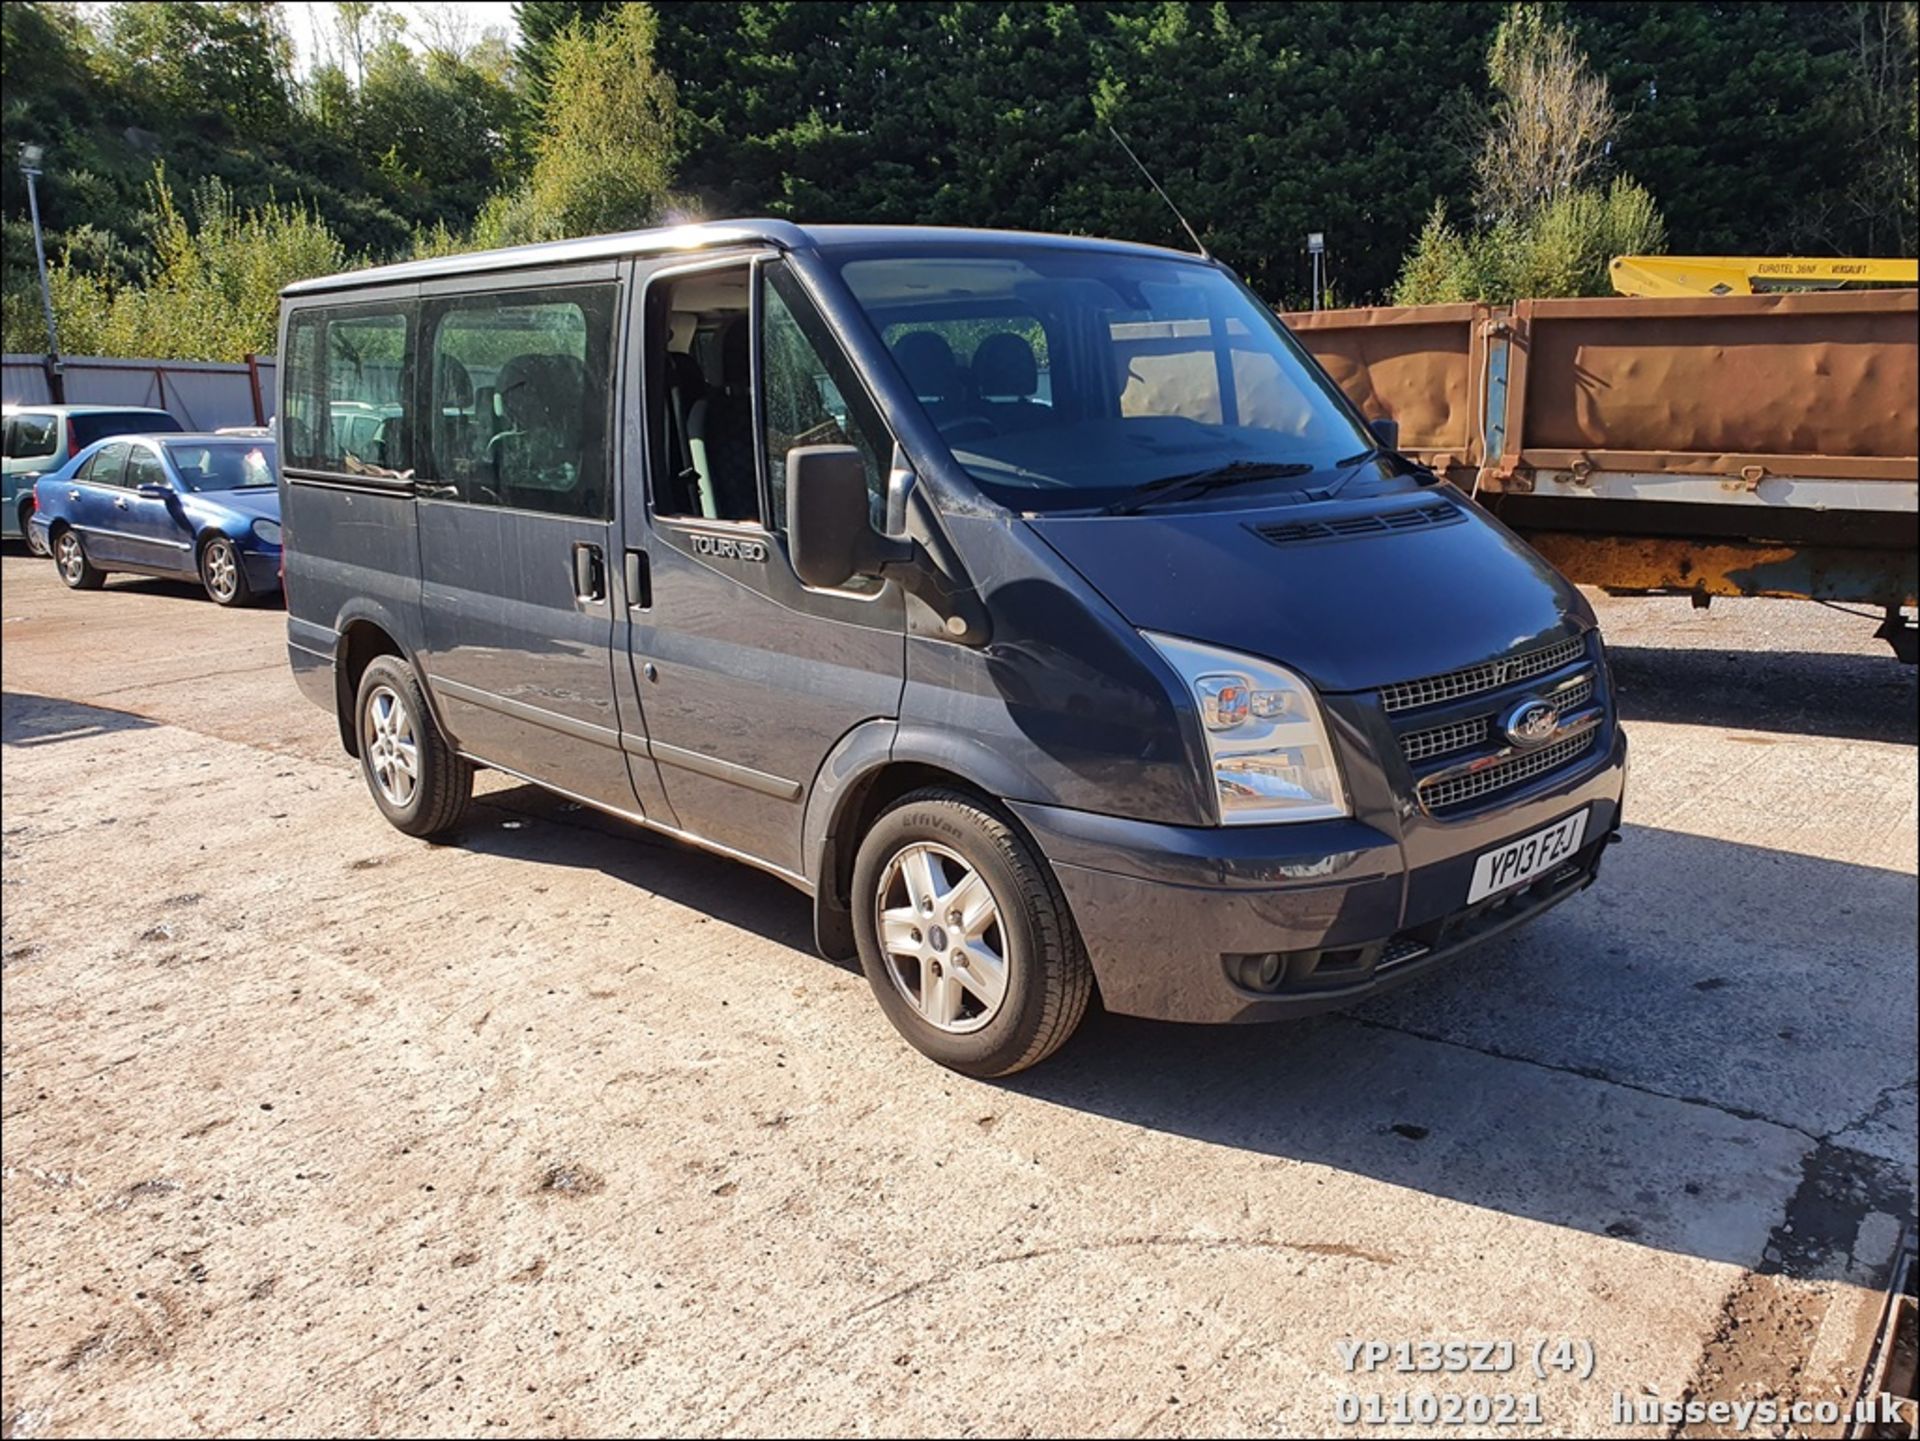 13/13 FORD TRANSIT 125 T280 FWD - 2198cc 5dr MPV (Grey) - Image 4 of 18